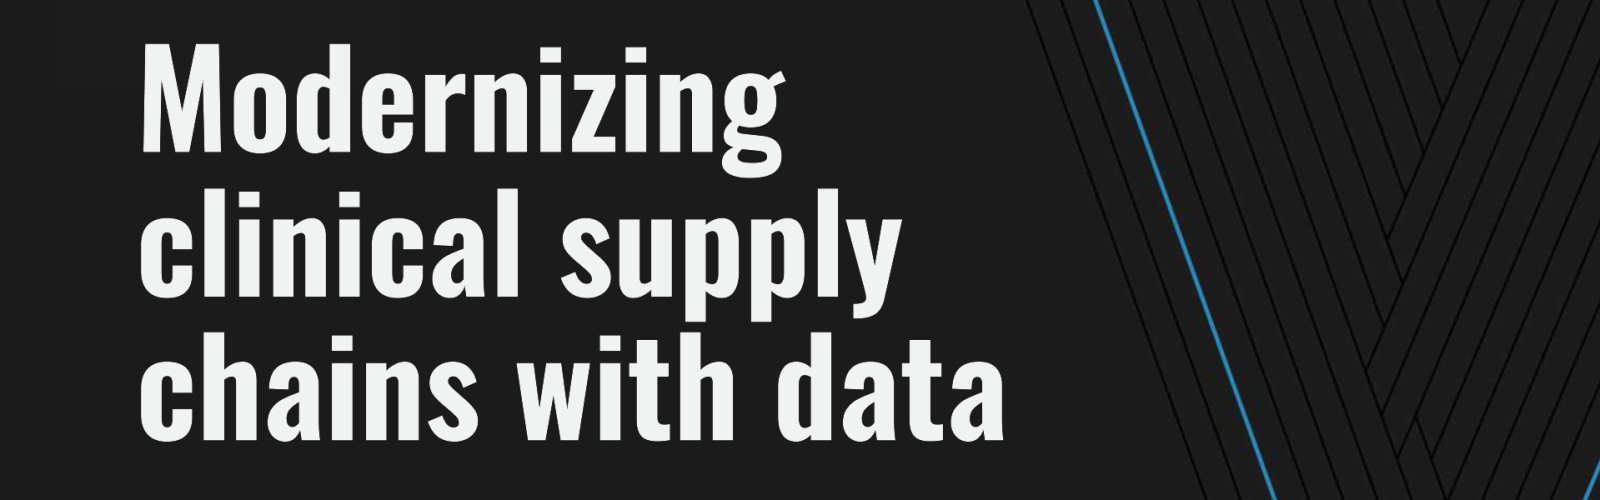 Modernizing clinical supply chains with data_final